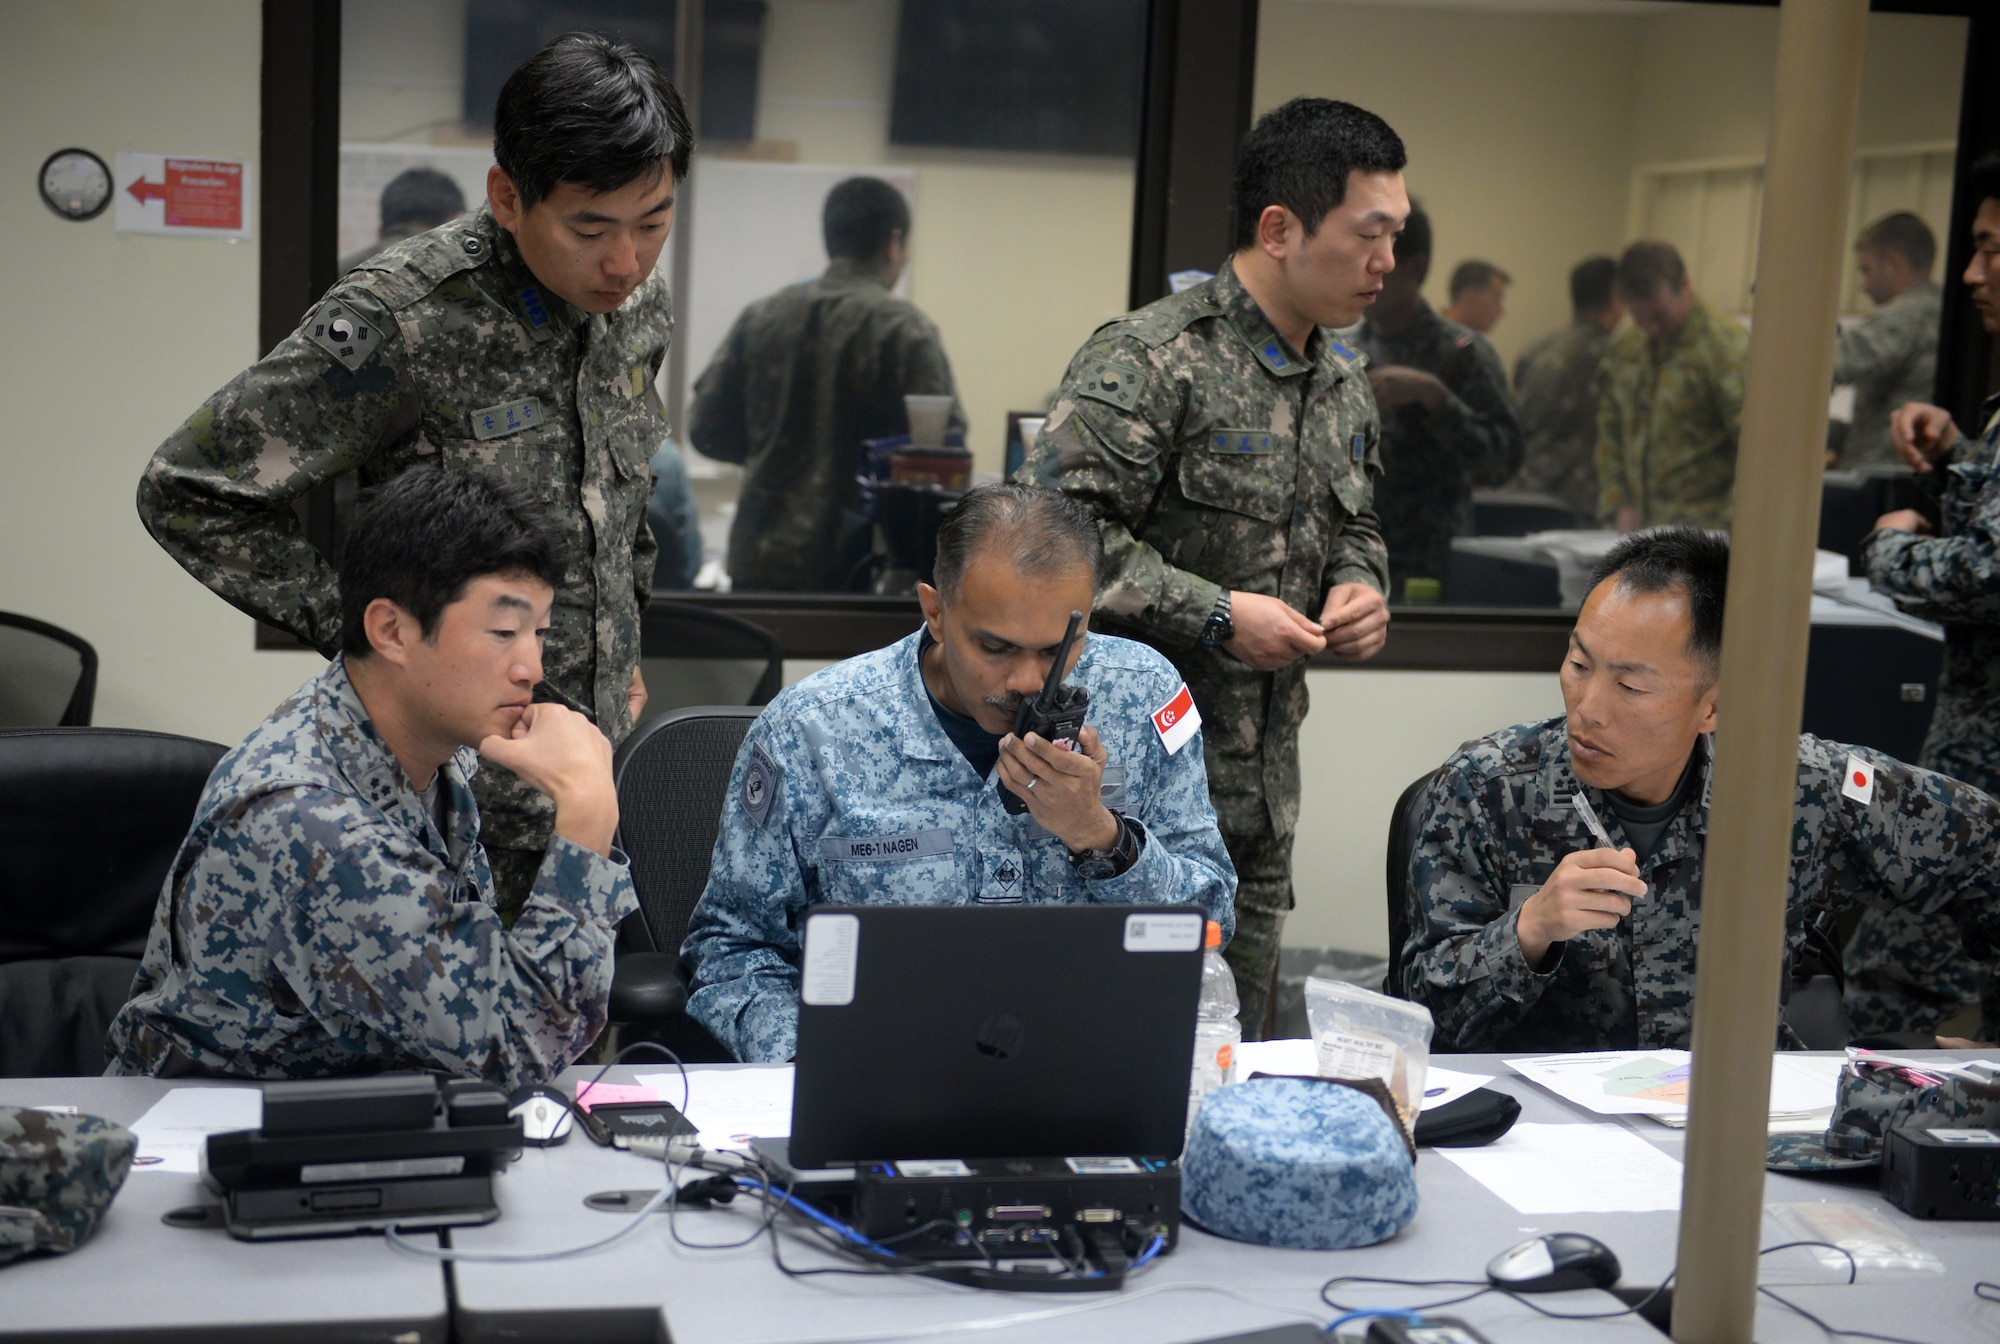 Airmen from the Japan Air Self Defense Force, Republic of Korea Air Force and Republic of Singapore Air Force participate in the command and control section of the final exercise of Partner Nation Silver Flag Feb. 19, 2016, at Andersen Air Force Base, Guam. The contingency environment training focused on bare-base beddown, sustainment operations and recovery after an attack. (U.S. Air Force photo by Senior Airman Joshua Smoot/Released)